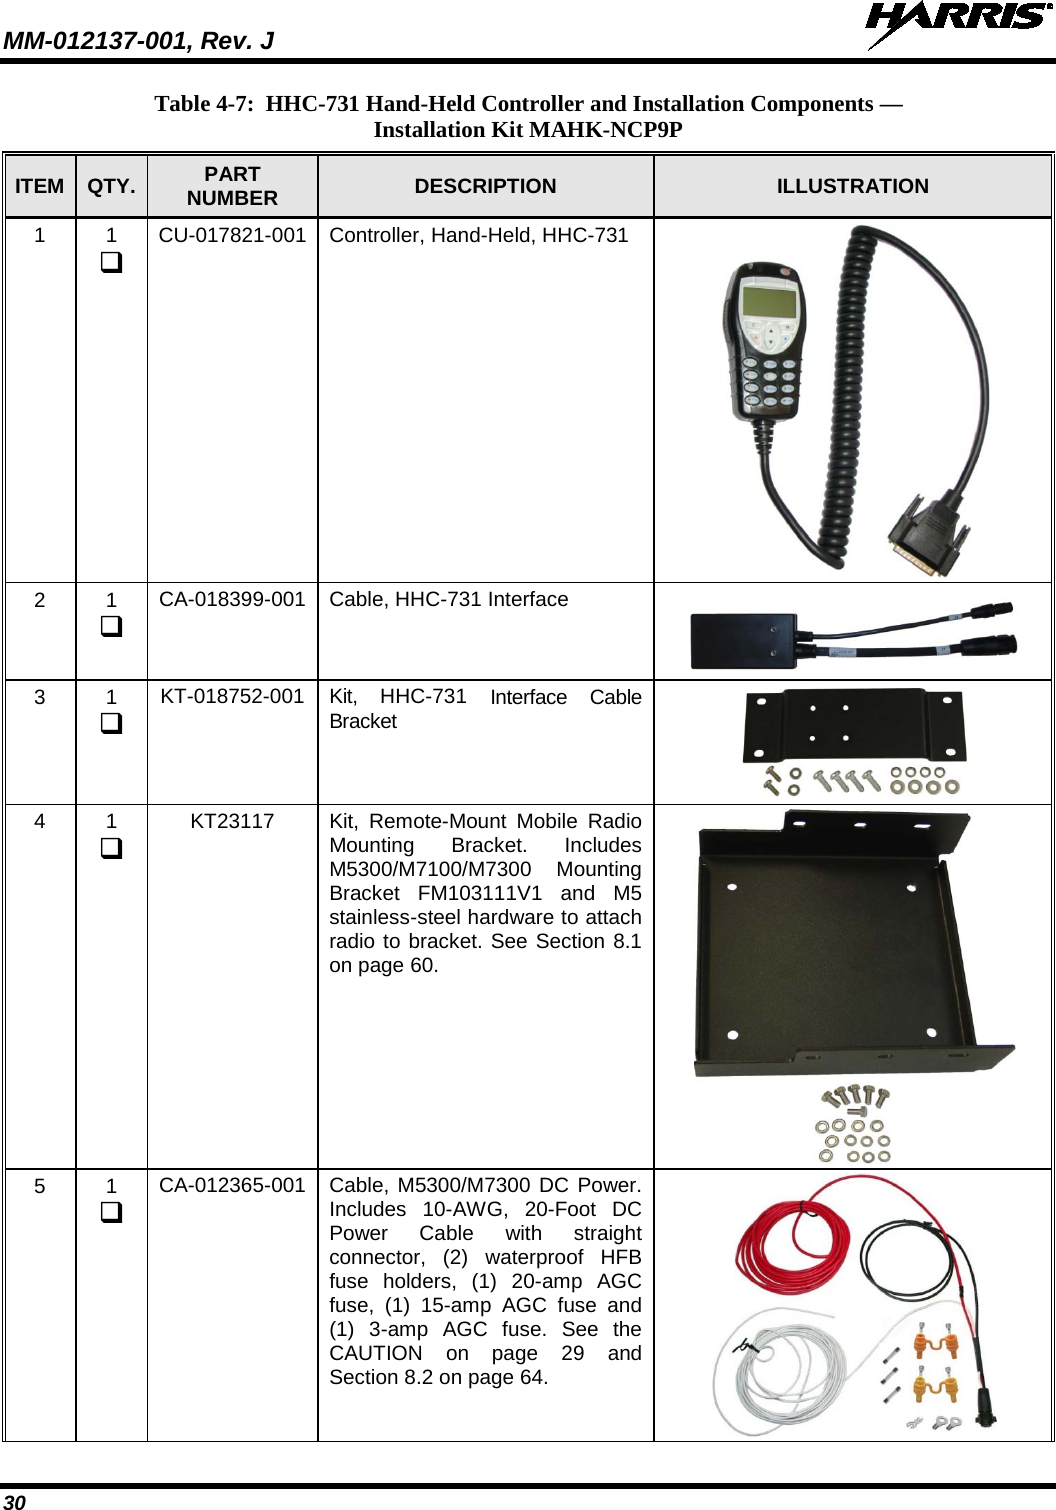 MM-012137-001, Rev. J   30 Table 4-7:  HHC-731 Hand-Held Controller and Installation Components —  Installation Kit MAHK-NCP9P ITEM QTY. PART NUMBER DESCRIPTION ILLUSTRATION 1  1  CU-017821-001 Controller, Hand-Held, HHC-731  2  1  CA-018399-001 Cable, HHC-731 Interface  3  1  KT-018752-001 Kit, HHC-731 Interface Cable Bracket  4  1  KT23117 Kit, Remote-Mount Mobile Radio Mounting Bracket. Includes M5300/M7100/M7300 Mounting Bracket FM103111V1 and M5 stainless-steel hardware to attach radio to bracket. See Section 8.1 on page 60.  5  1  CA-012365-001 Cable, M5300/M7300 DC Power. Includes 10-AWG, 20-Foot DC Power Cable with straight connector, (2) waterproof HFB fuse holders, (1) 20-amp AGC fuse, (1) 15-amp AGC fuse and (1) 3-amp AGC fuse. See the CAUTION  on page 29 and Section 8.2 on page 64.  